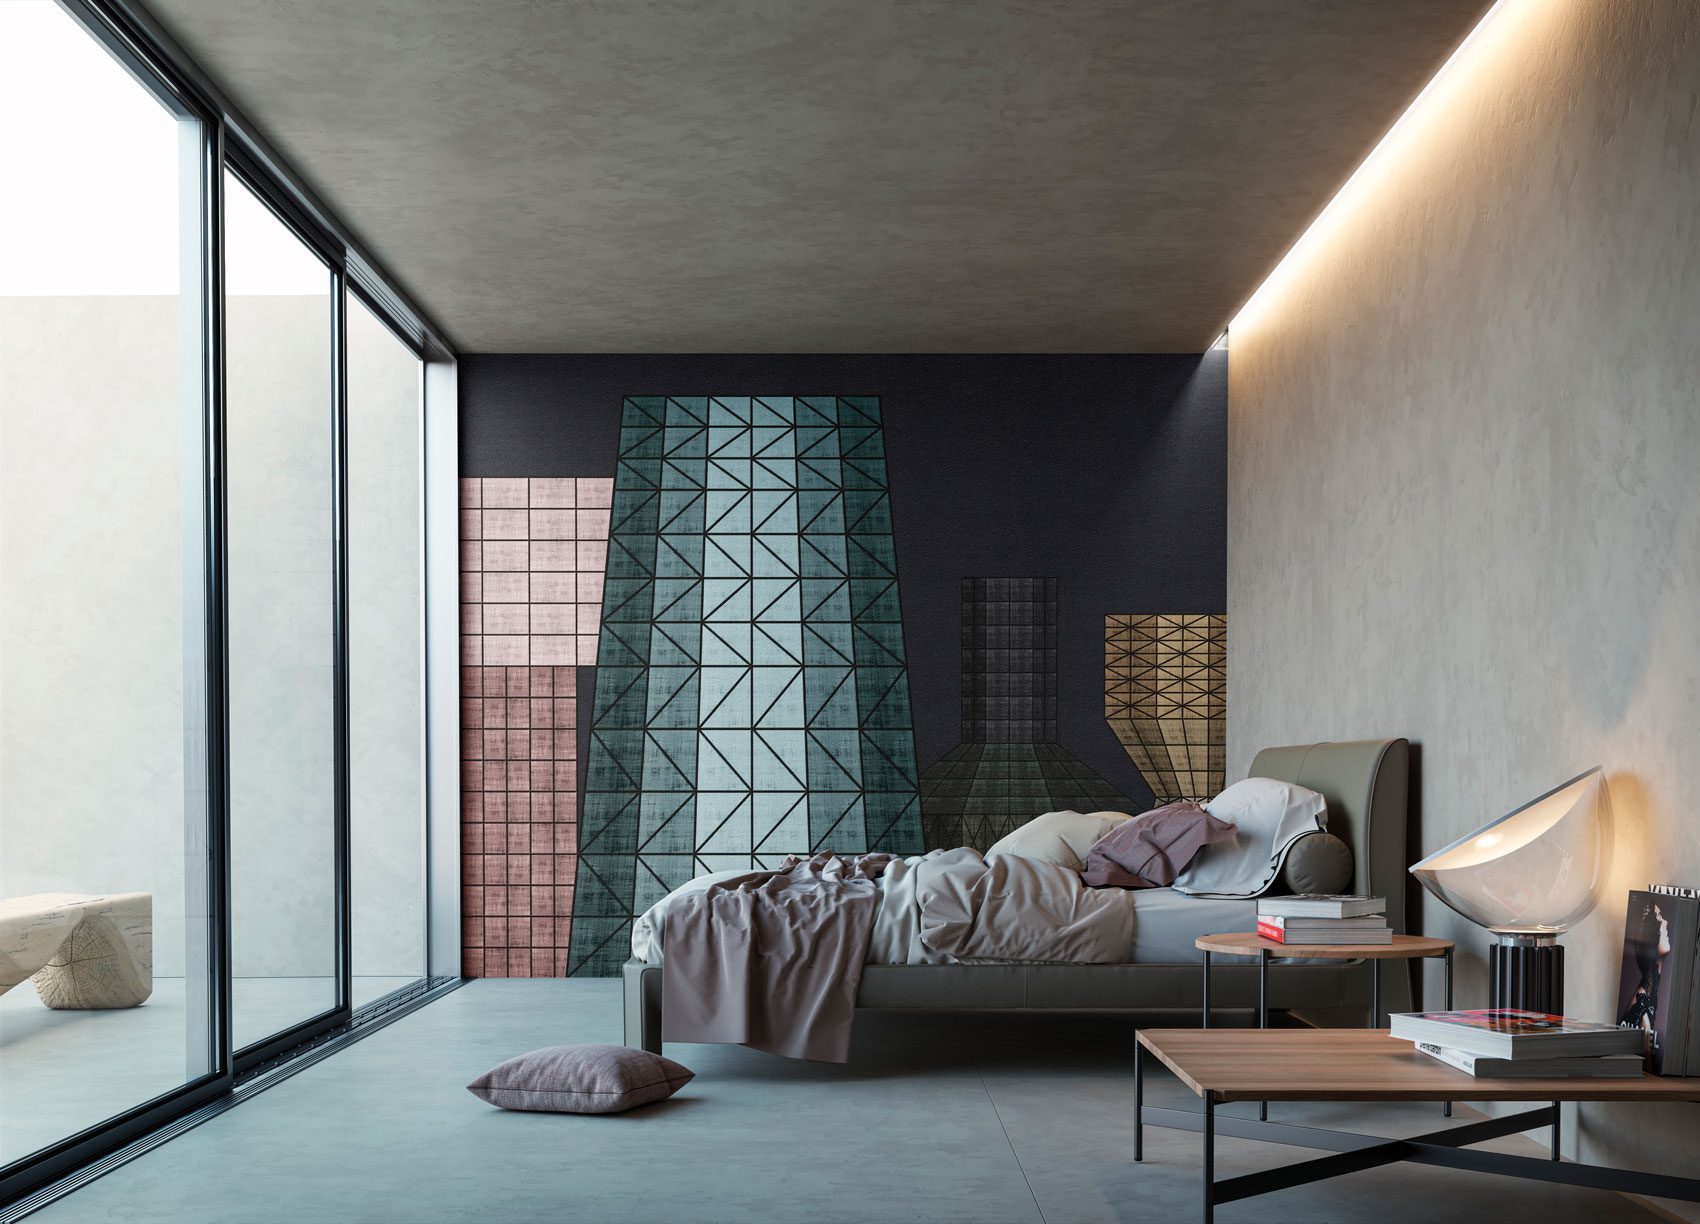 Betta artistic, geometric and colourful wallpaper from the Avenue Instabilelab catalogue.